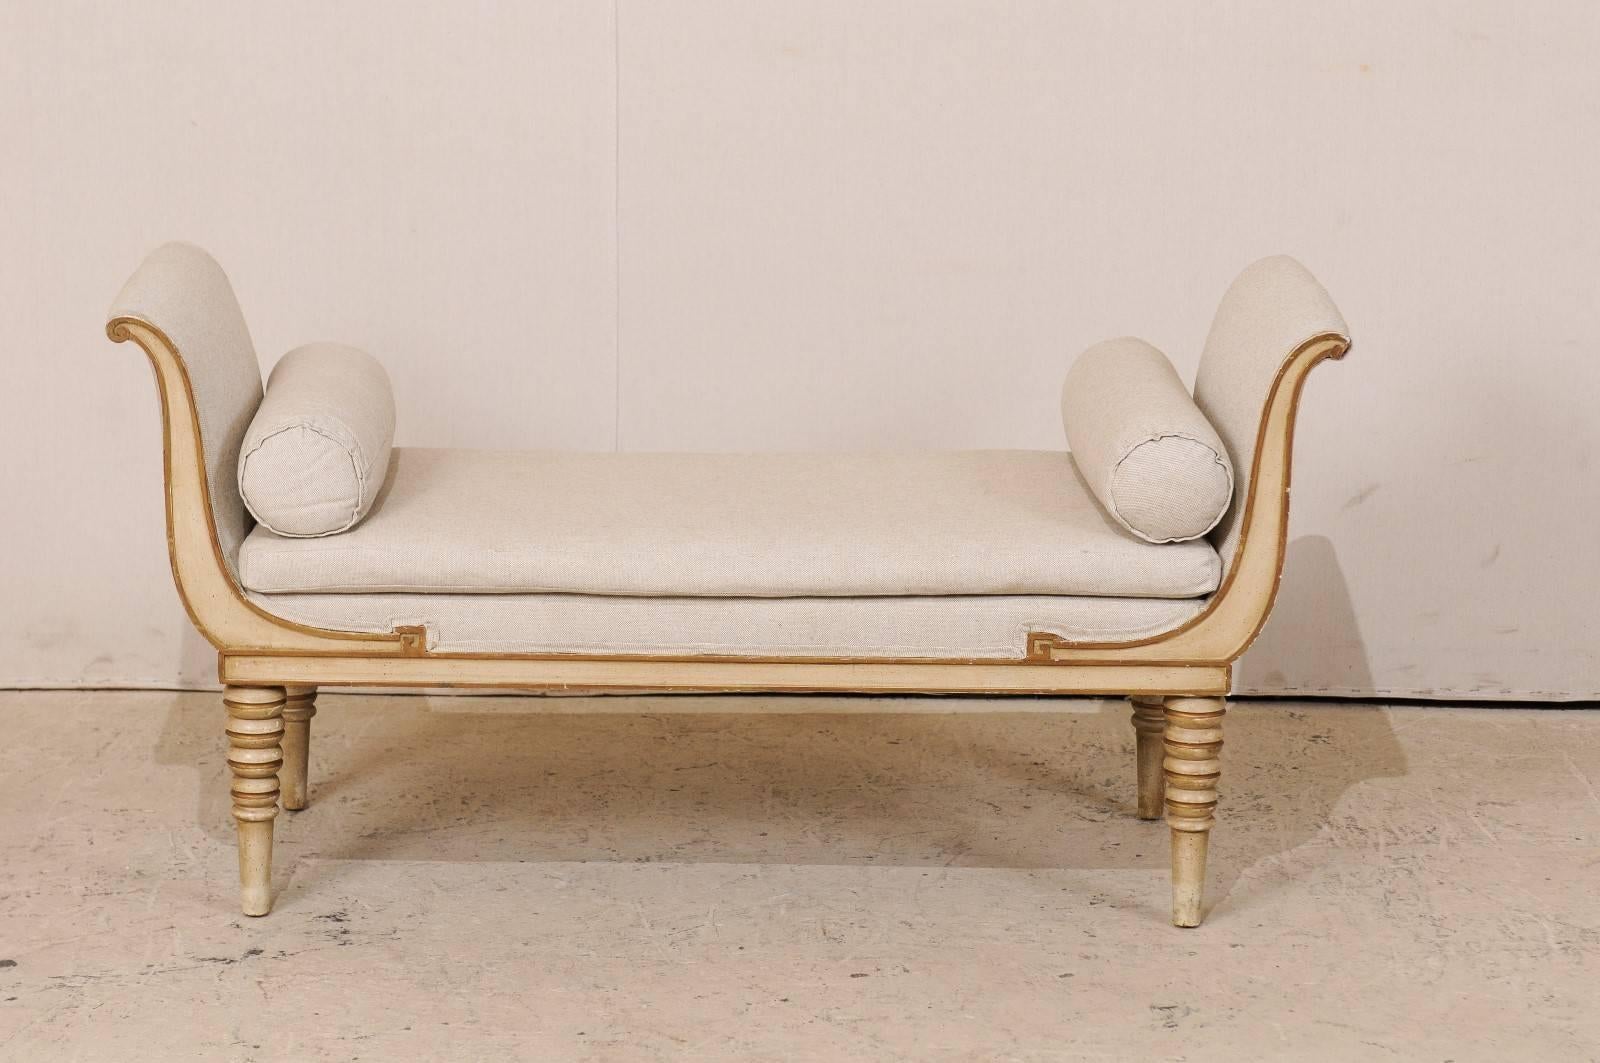 Carved French Récamier Style Daybed, Sofa or Bench with Bolster Pillows and Turned Legs